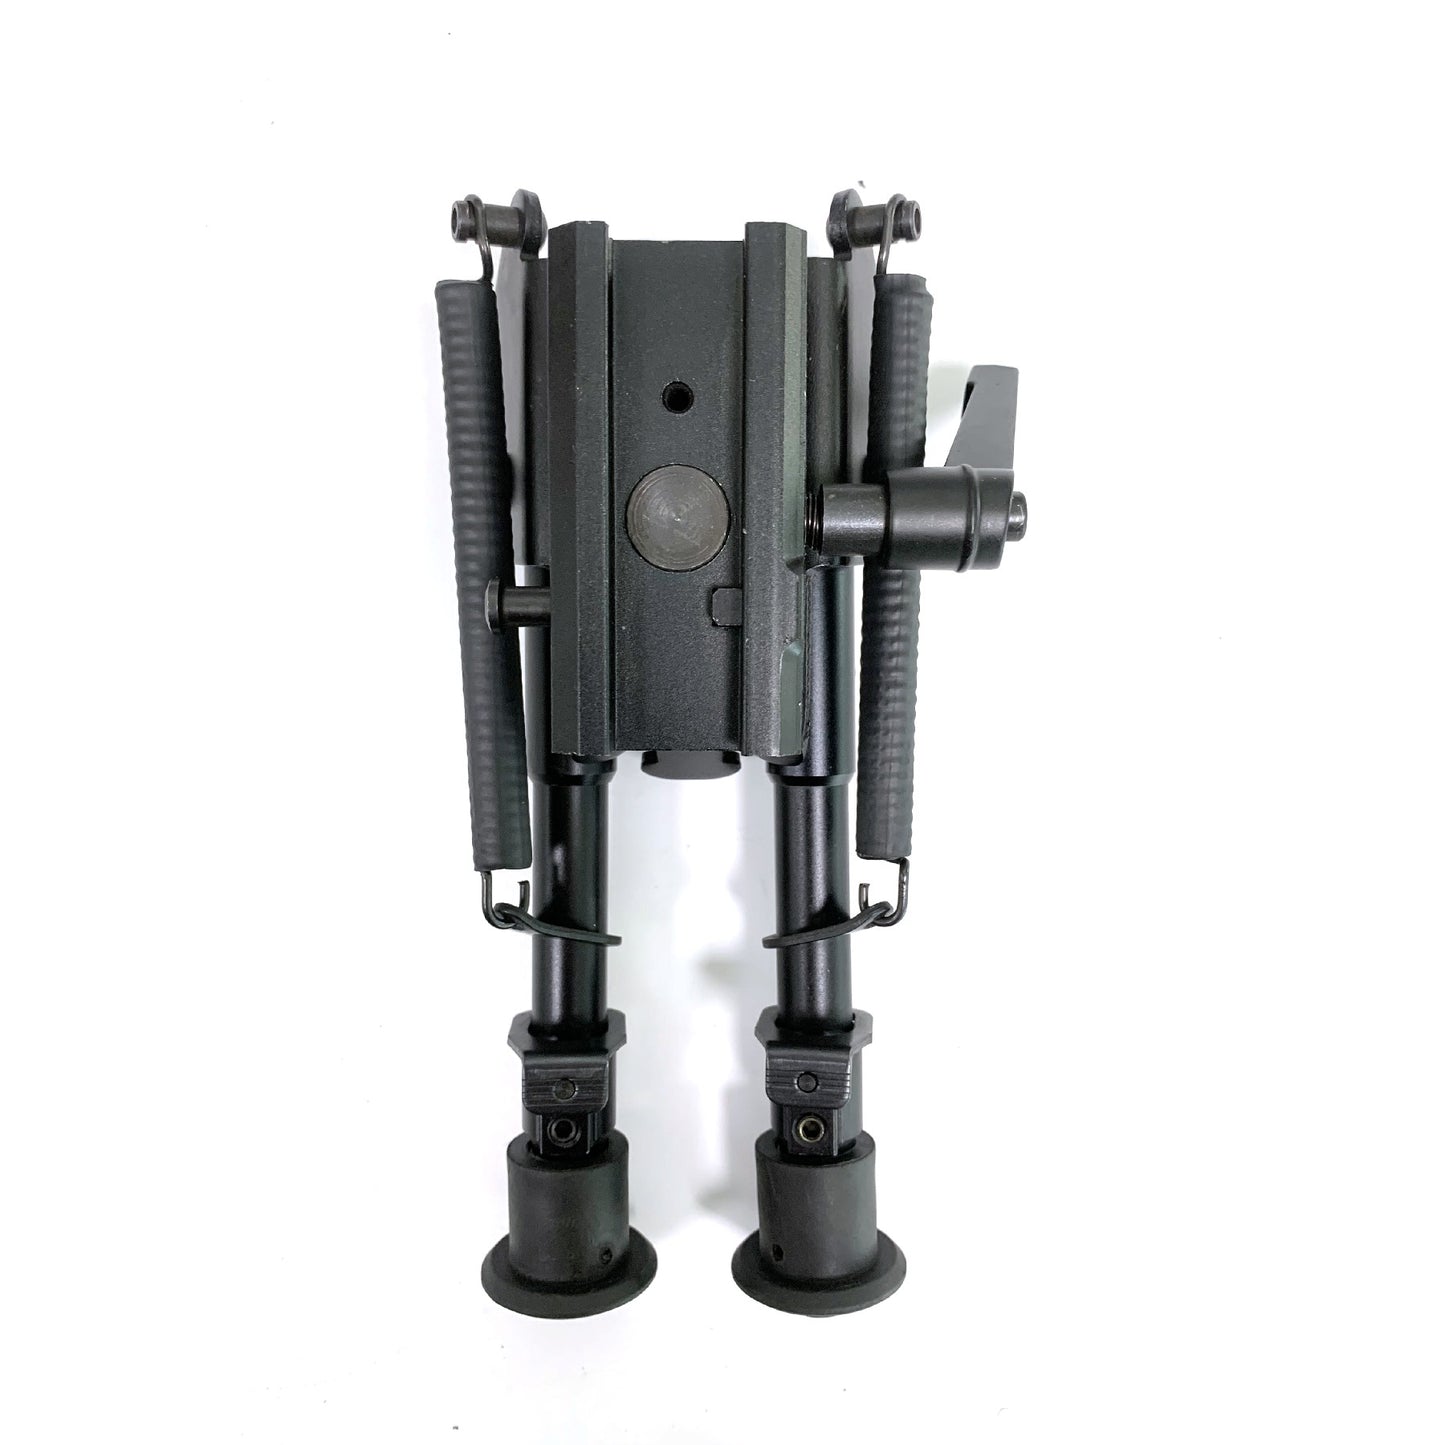 W/P Shooting Tactical Tripod 6-9'' Height Adjustable Foldable Tripod Rotate head-with wrench